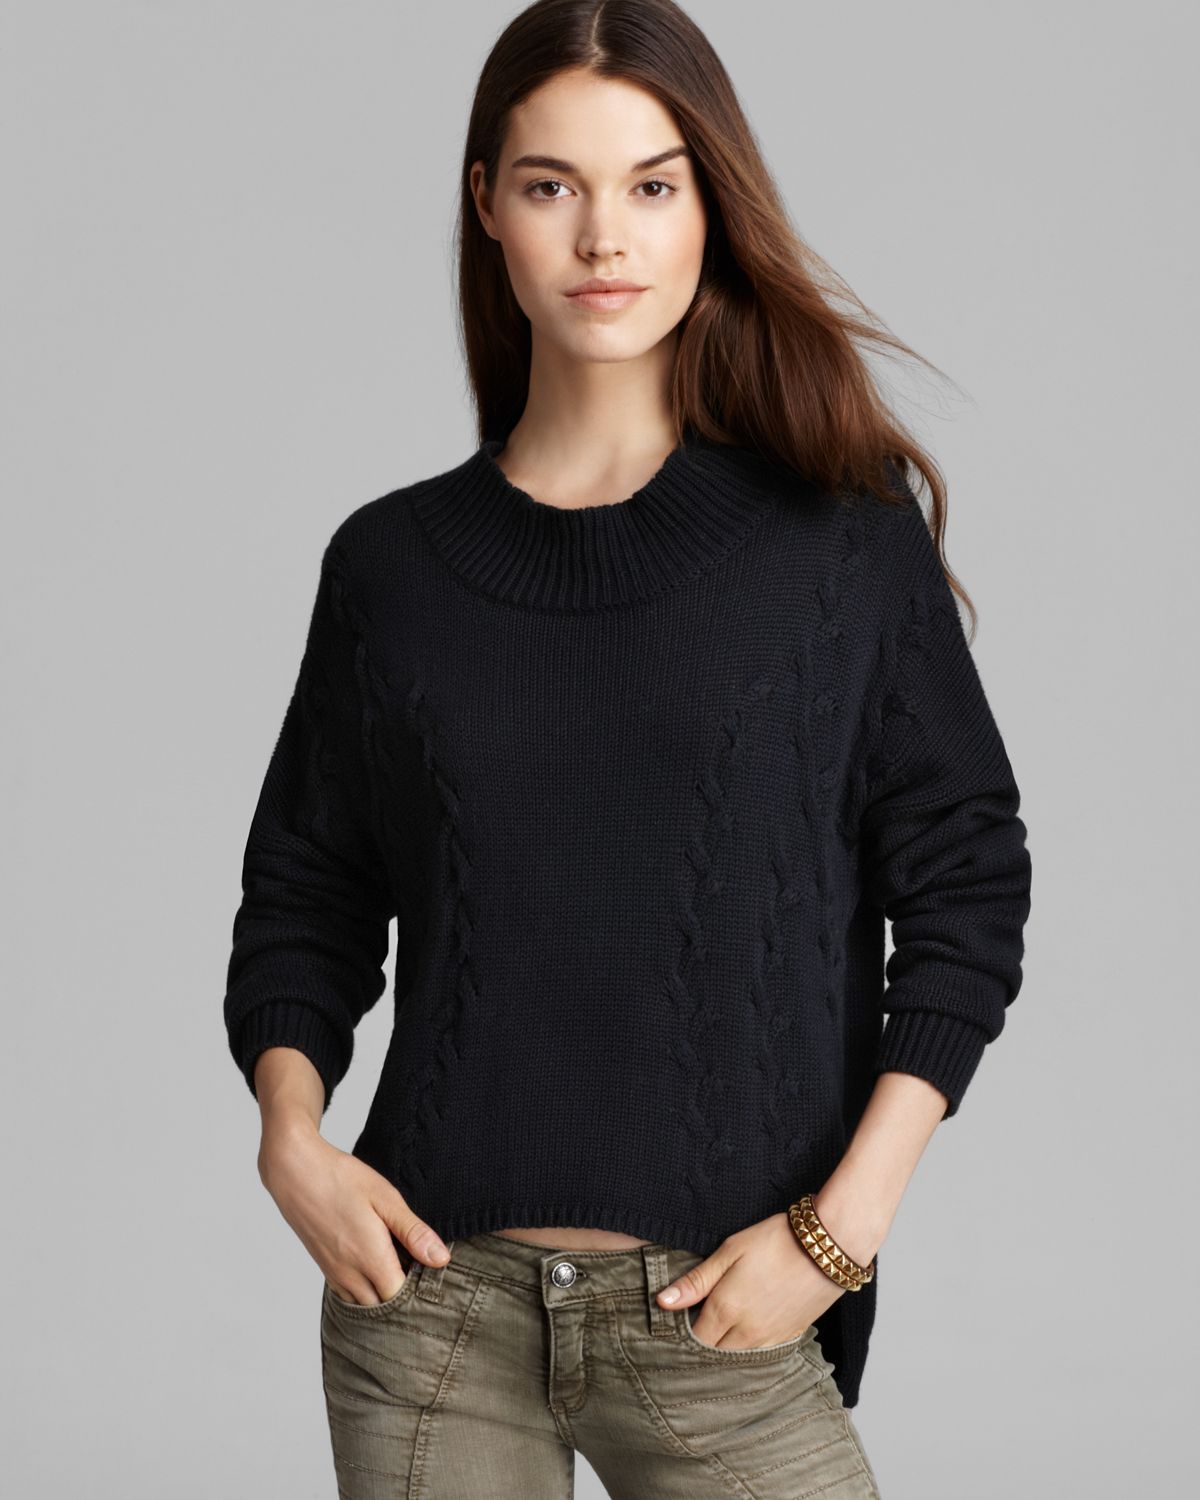 Lna Sweater Cable Knit Turtleneck in Black | Lyst